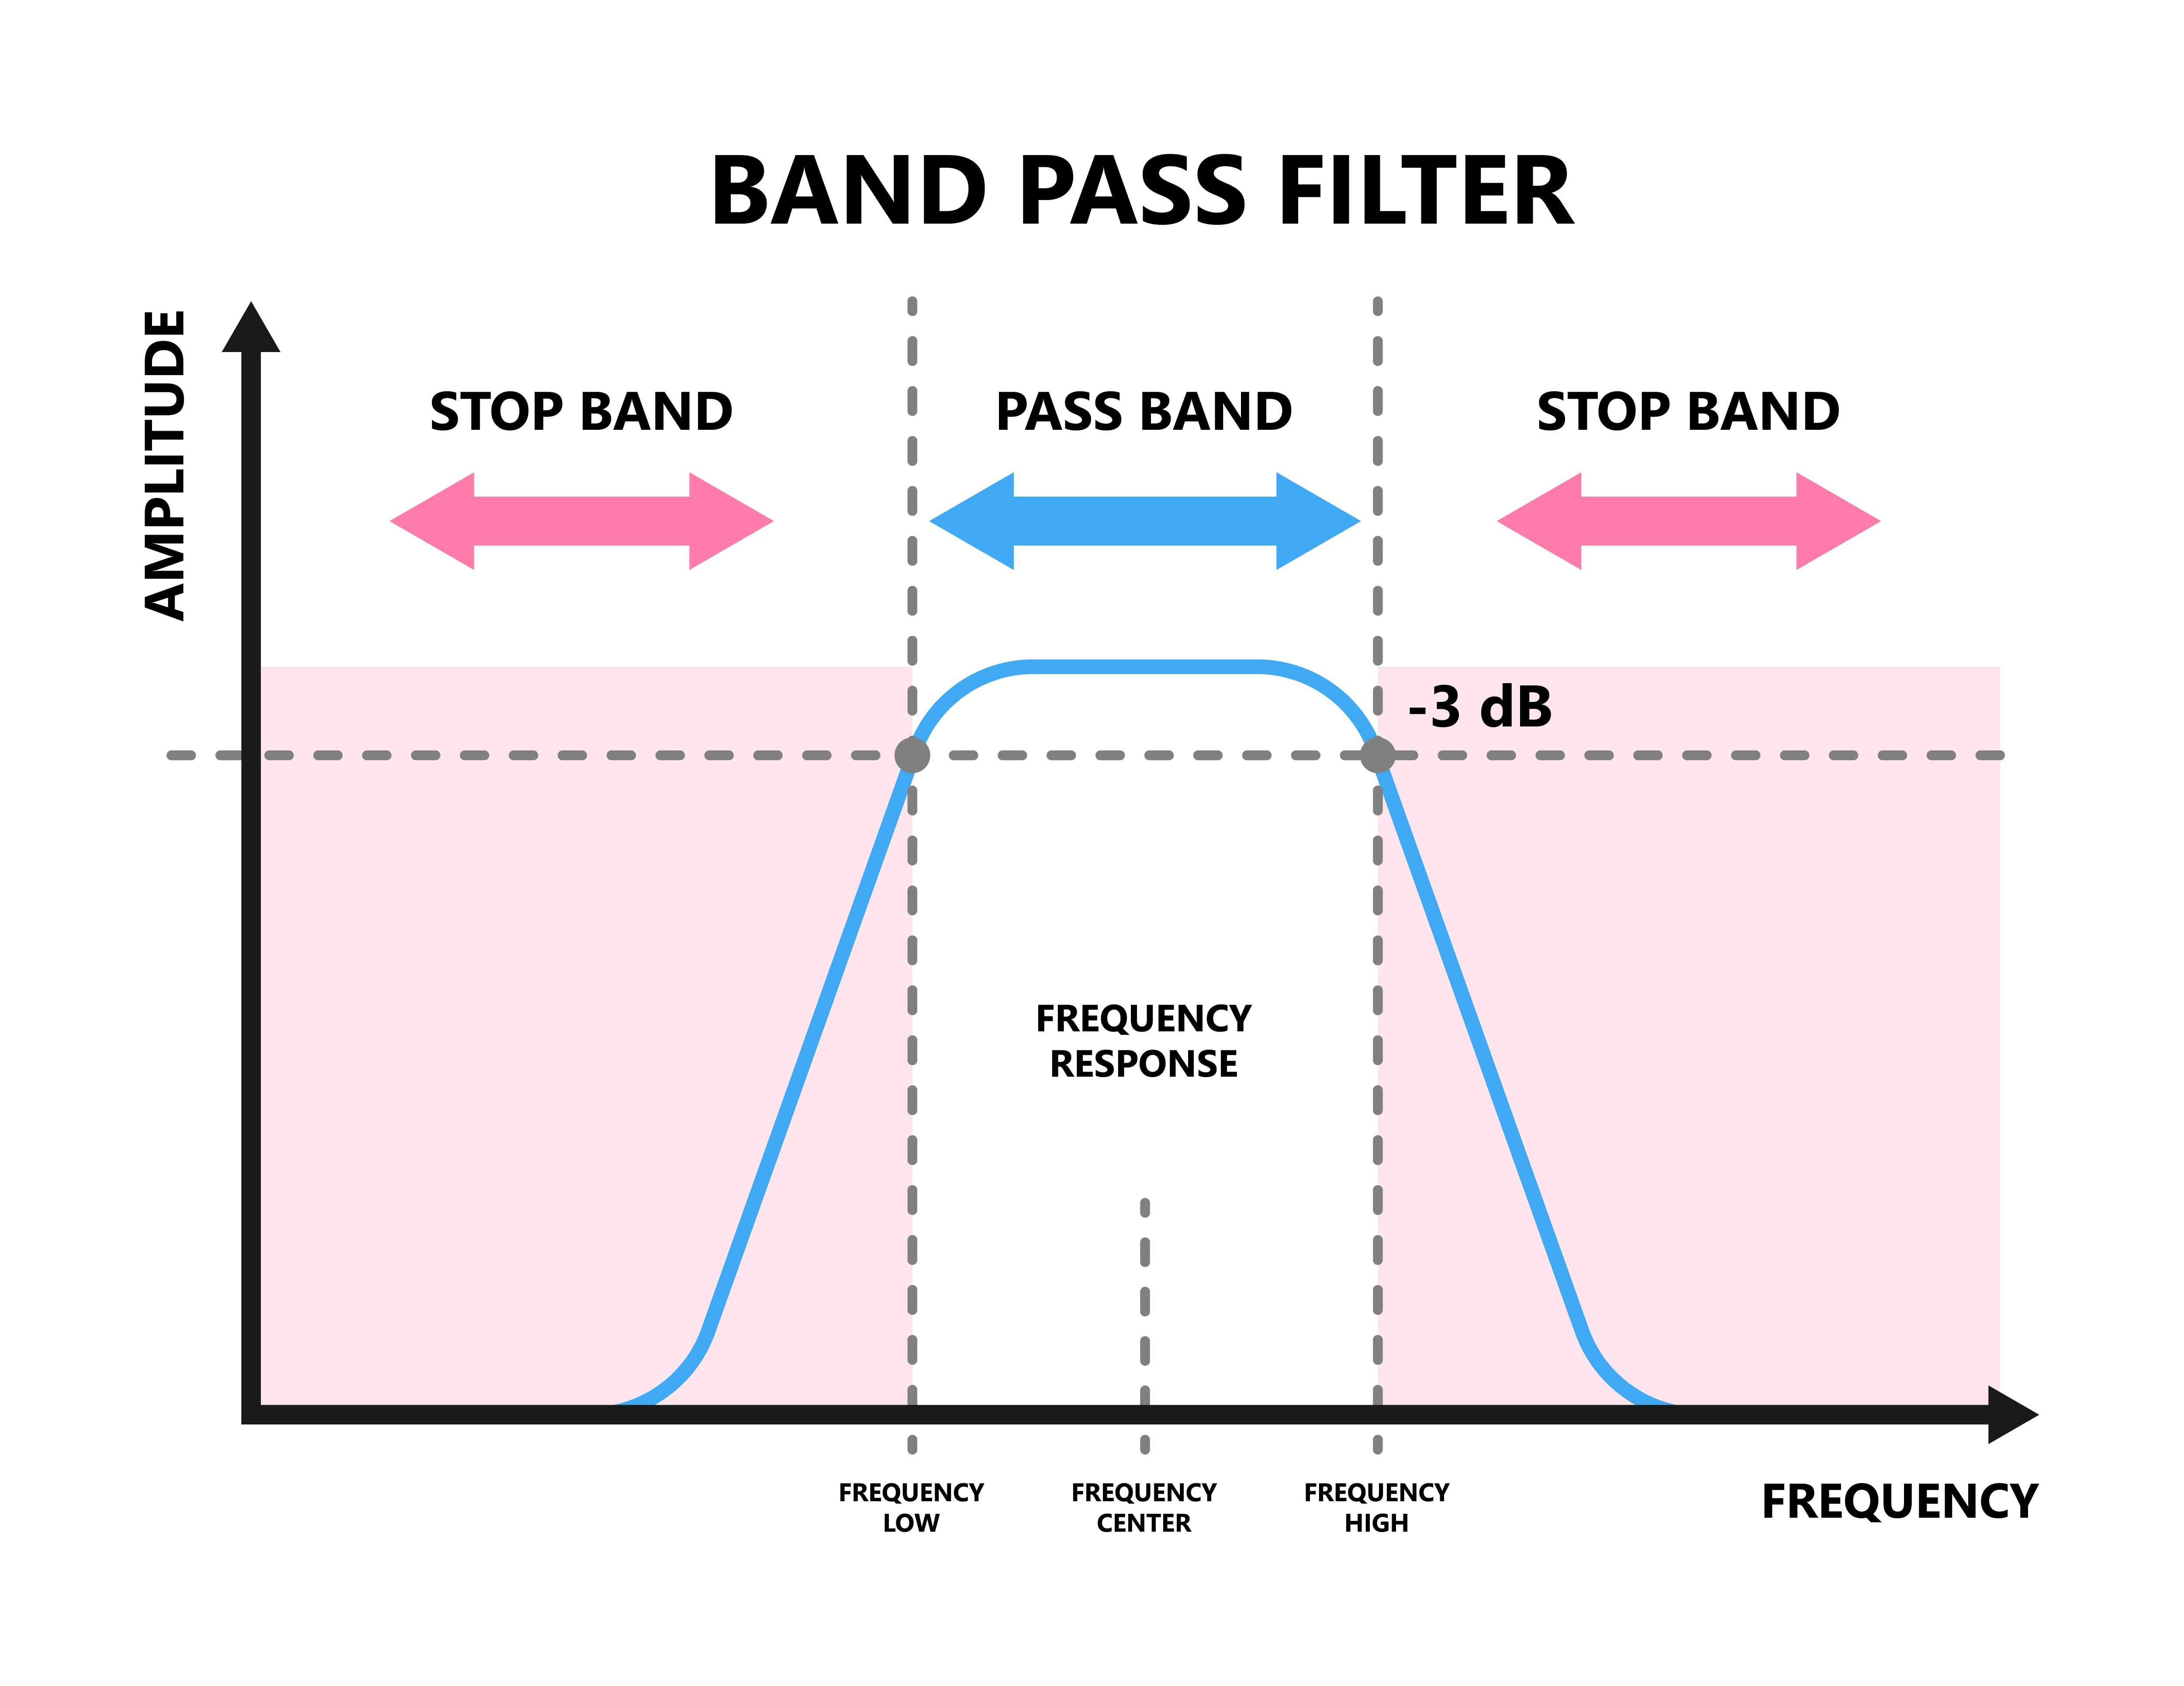 Band pass filter, eddy current testing